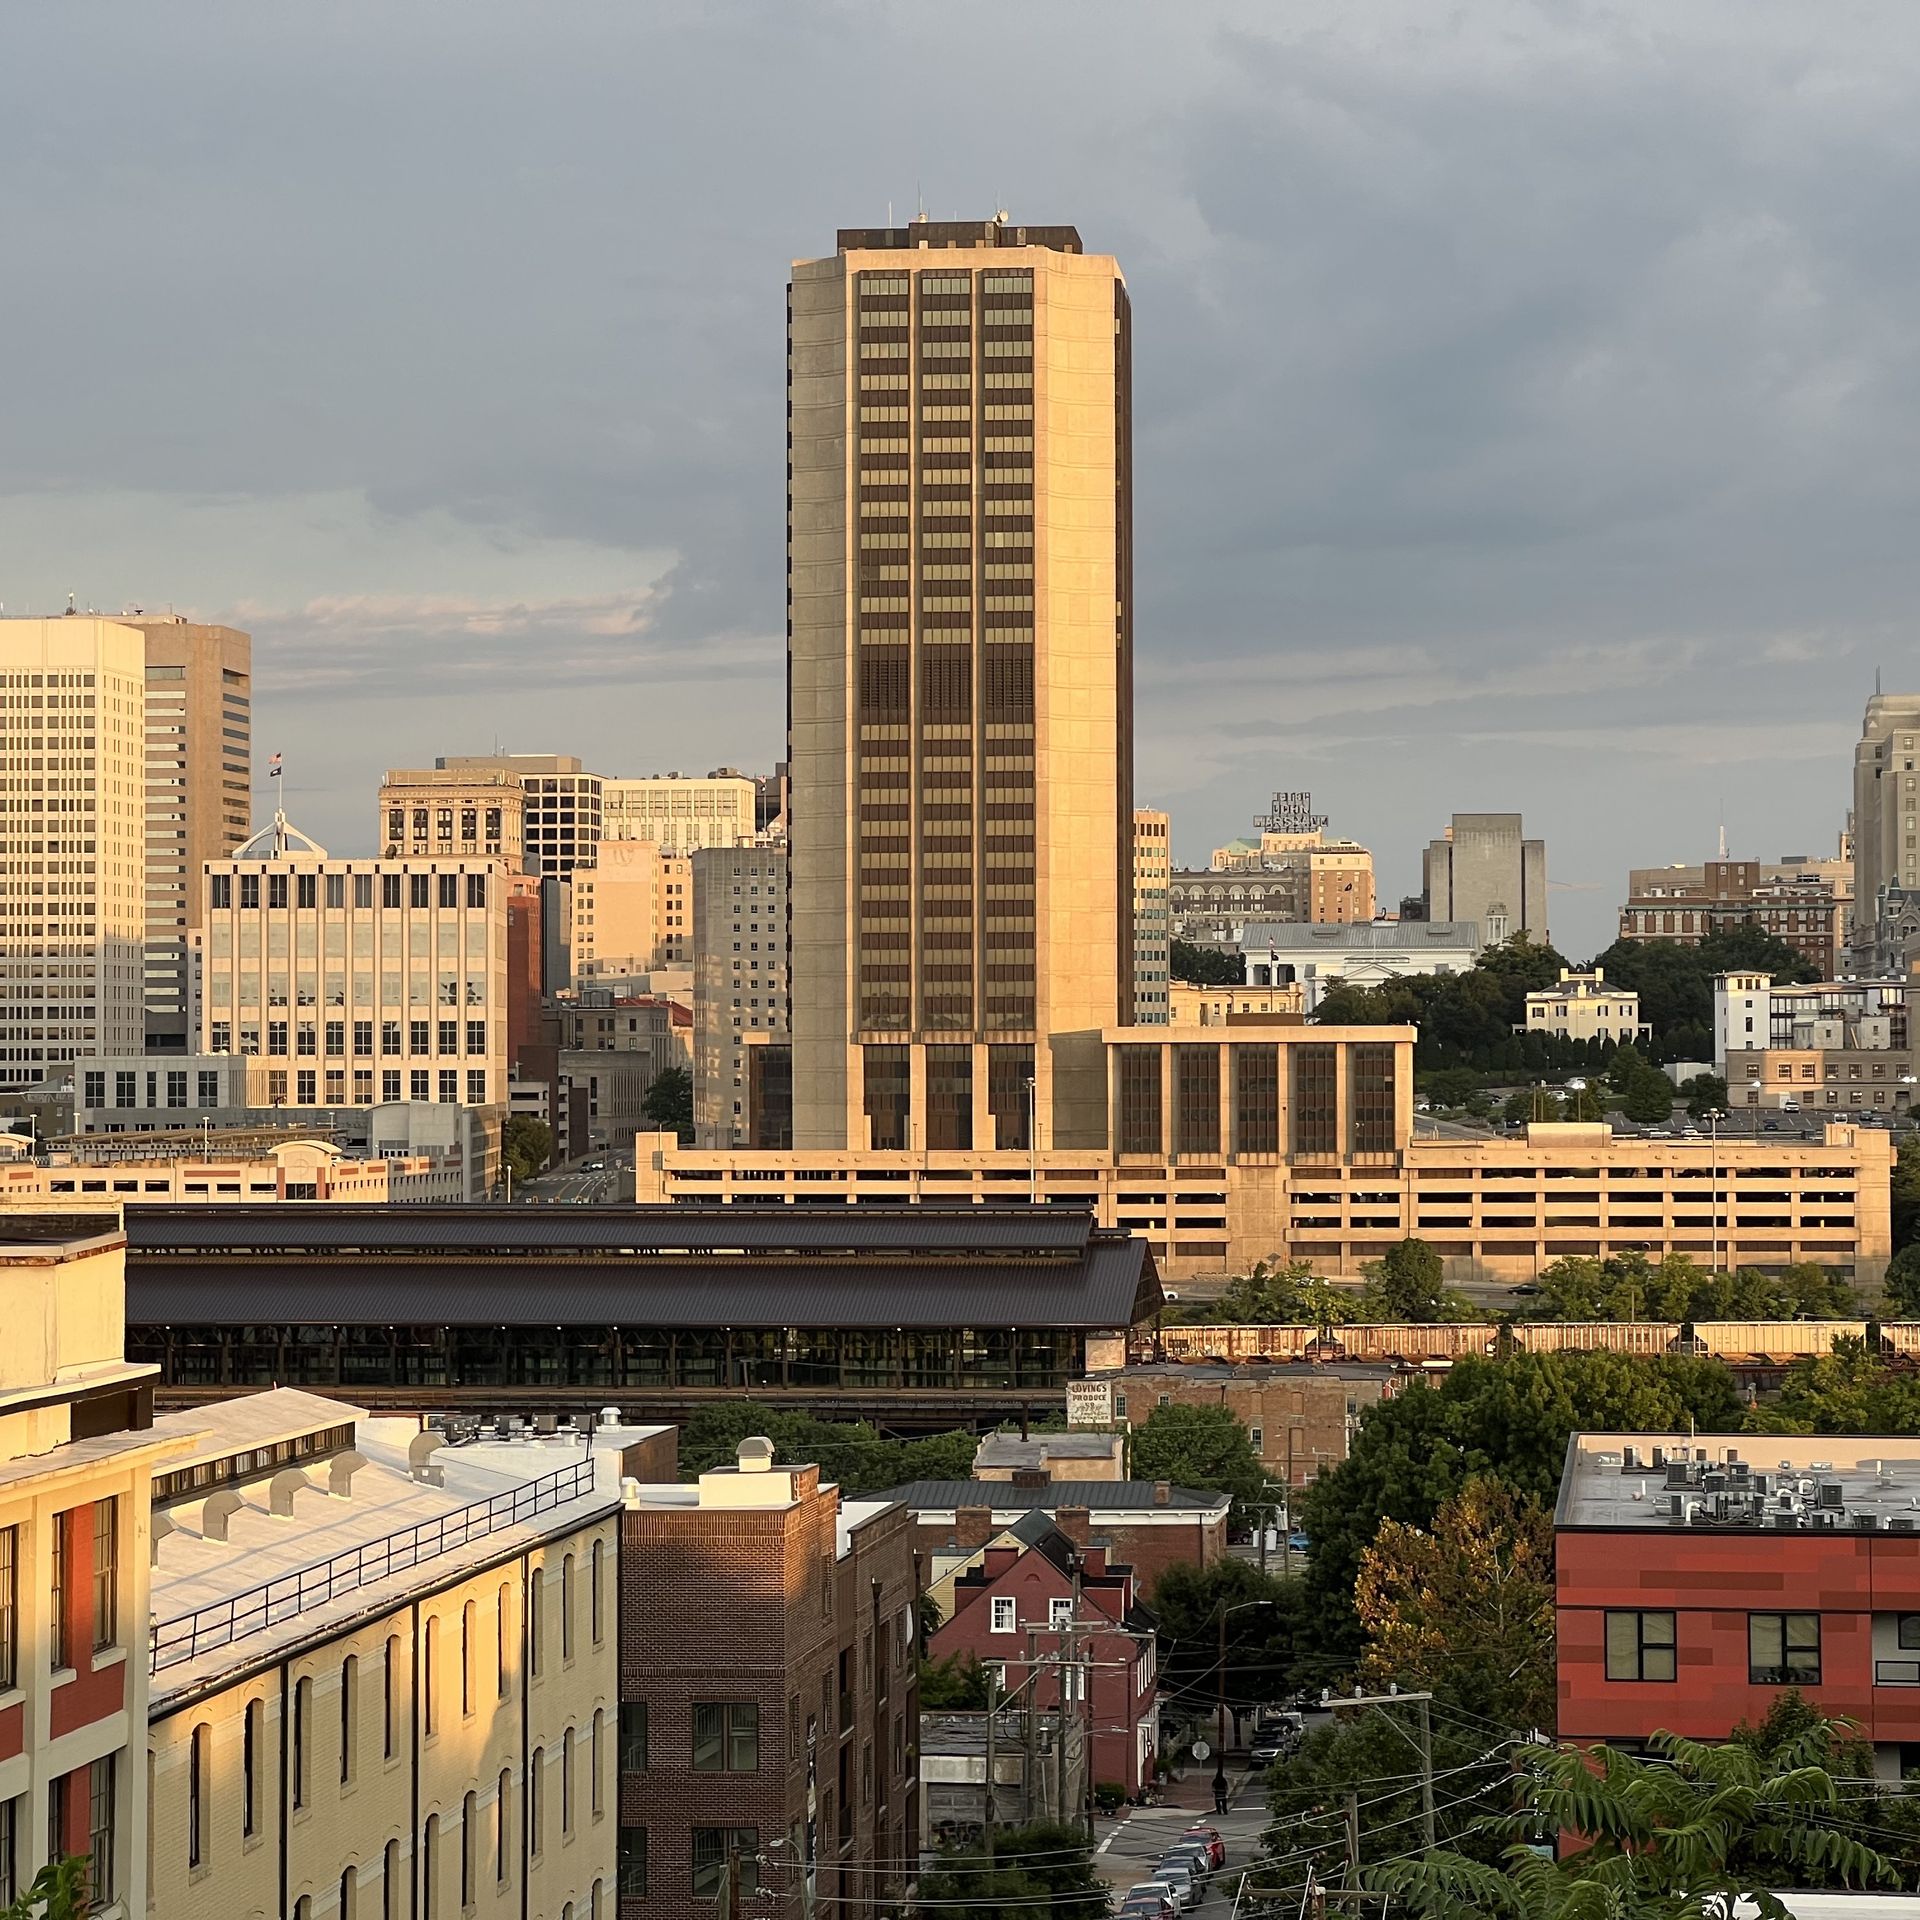 A photograph of the James Monroe building dominating Richmond's skyline.